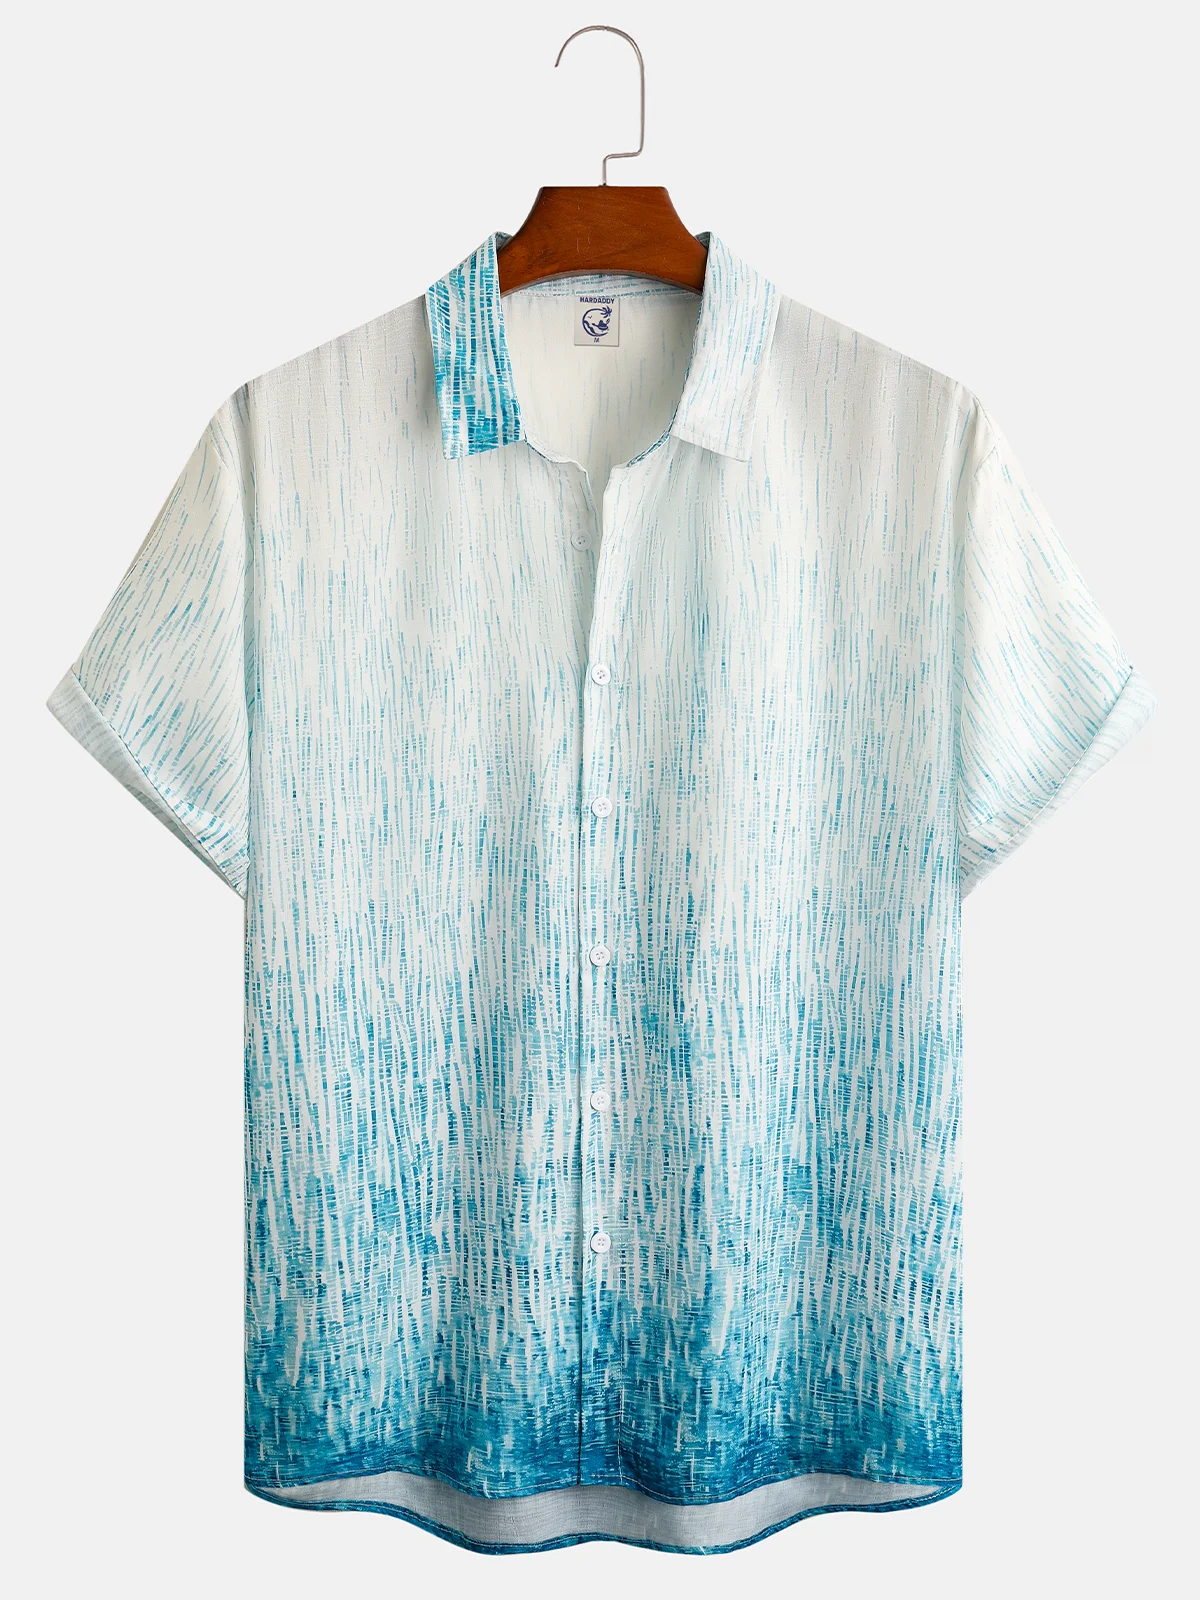 Hardaddy Geometric Abstract Chest Pocket Short Sleeve Casual Shirt